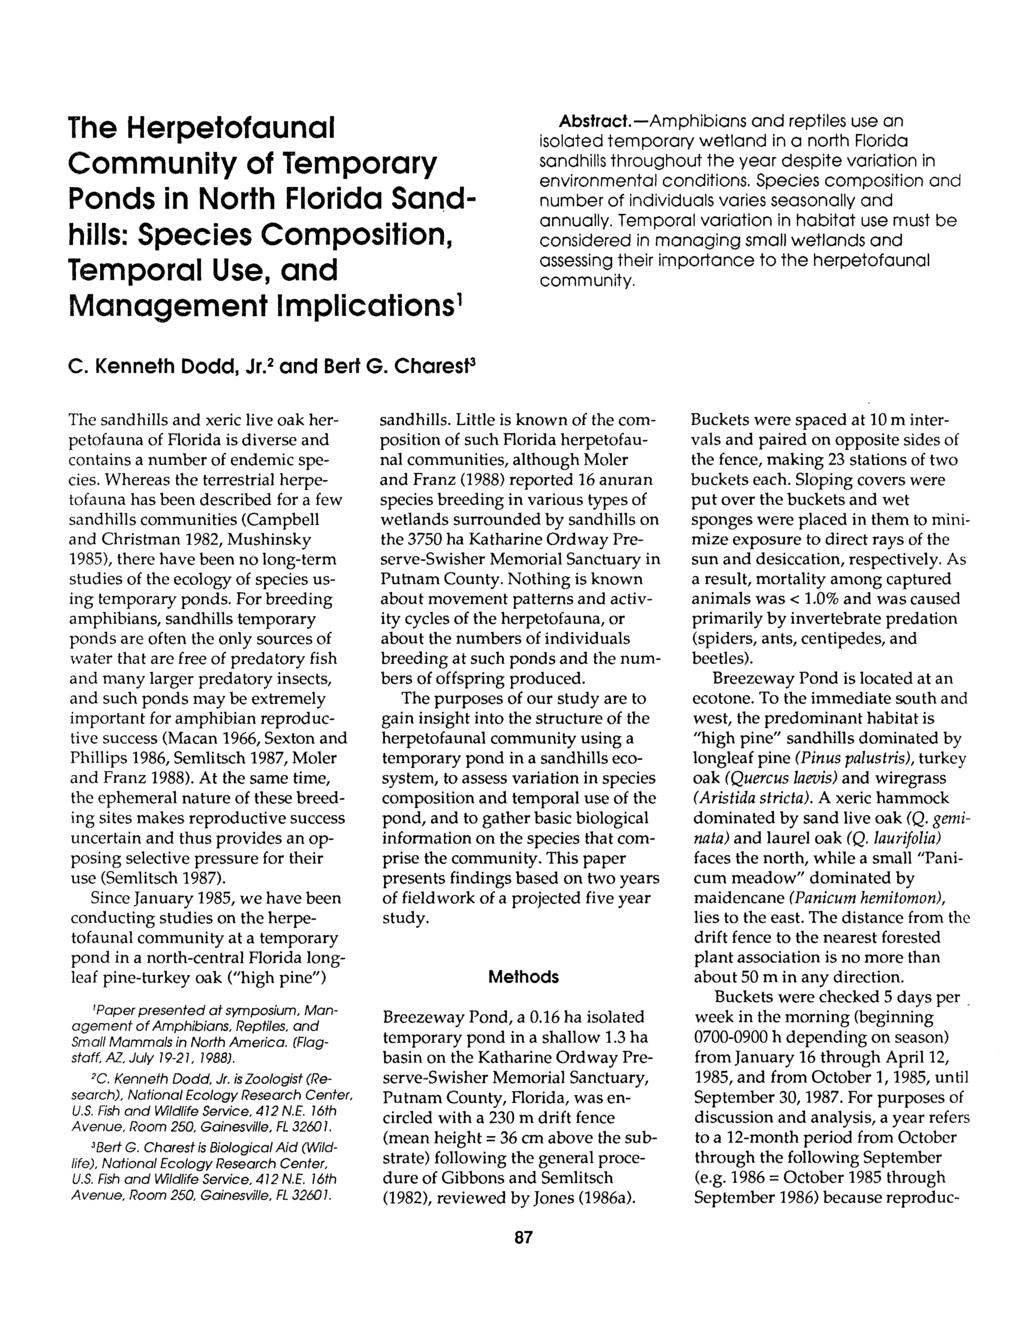 The Herpetofaunal Community of Temporary Ponds in North Florida Sandhills: Species Composition, Temporal Use, and ement implications1 Abstract.